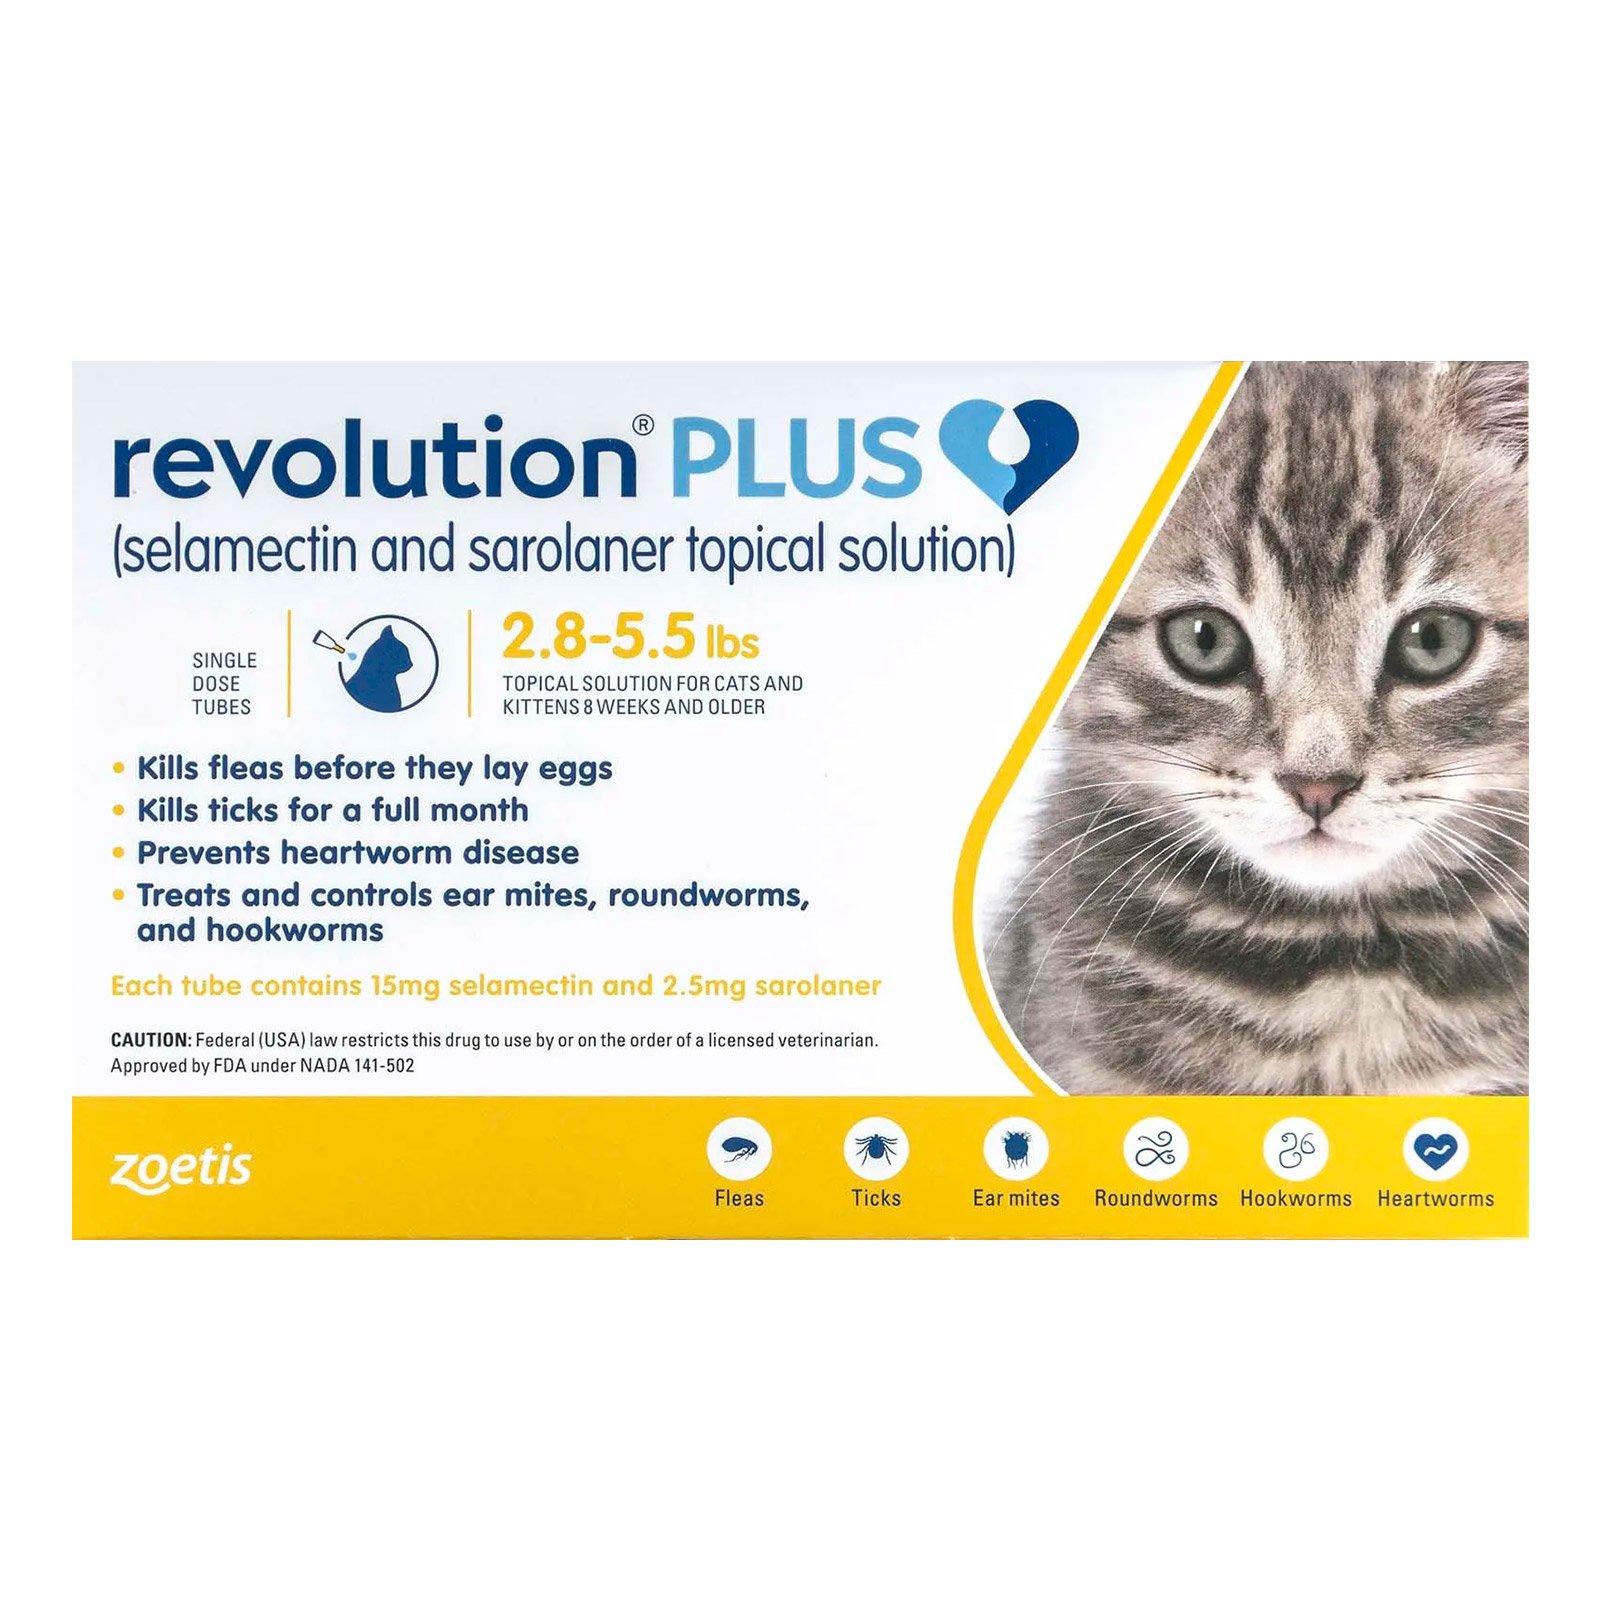 revolution-plus-for-Kittens-and-Small-Cats-2-5lbs-1-2Kg-Yellow.jpg